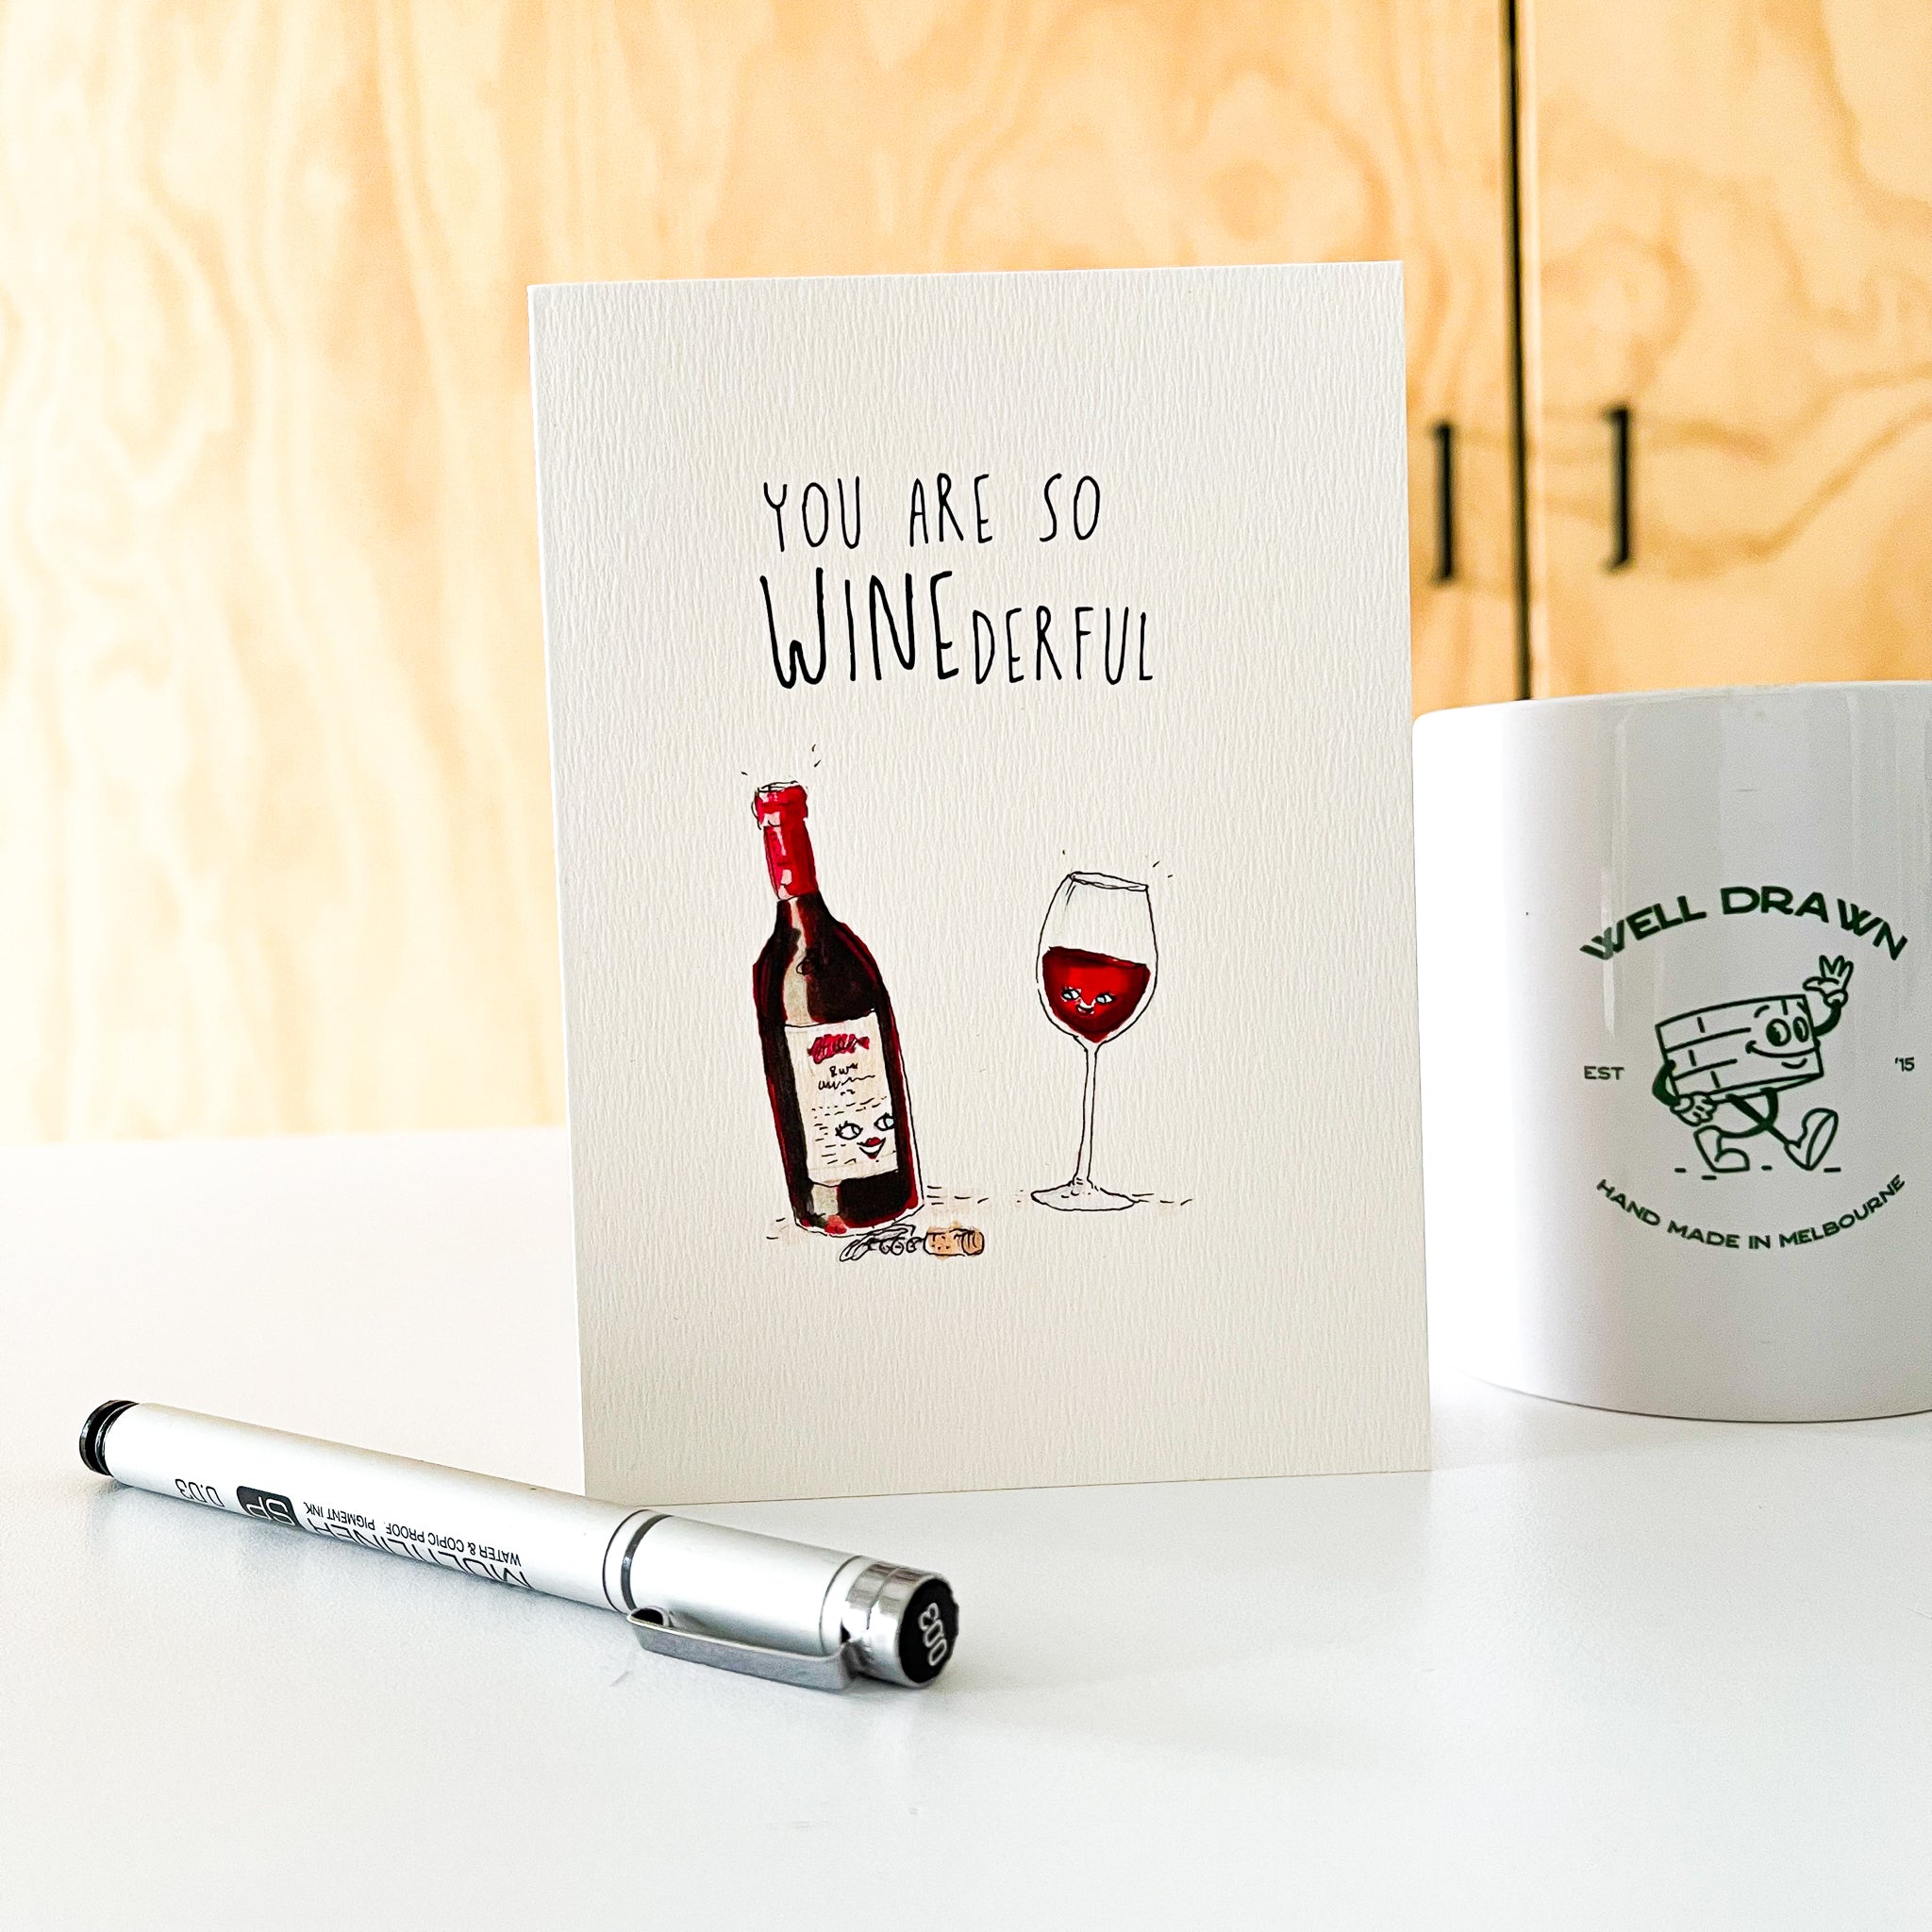 You Are So Winederful - Well Drawn